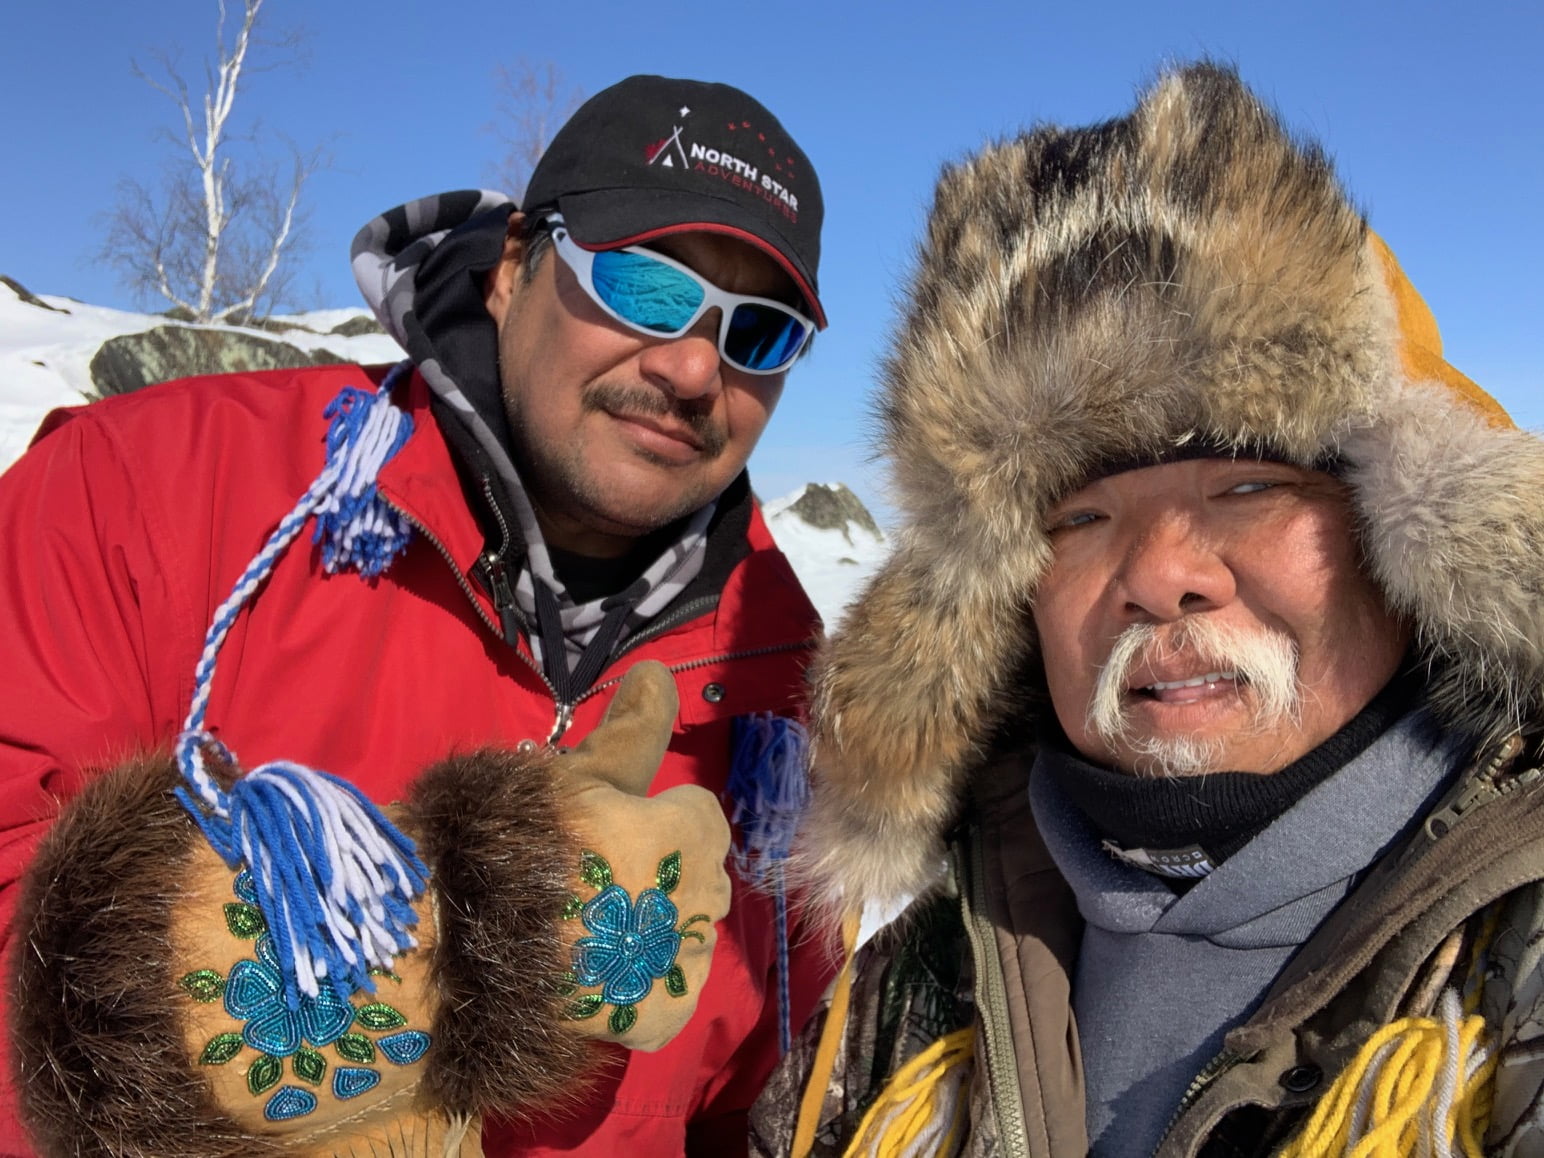 two indigenous guides outside working for north star adventures